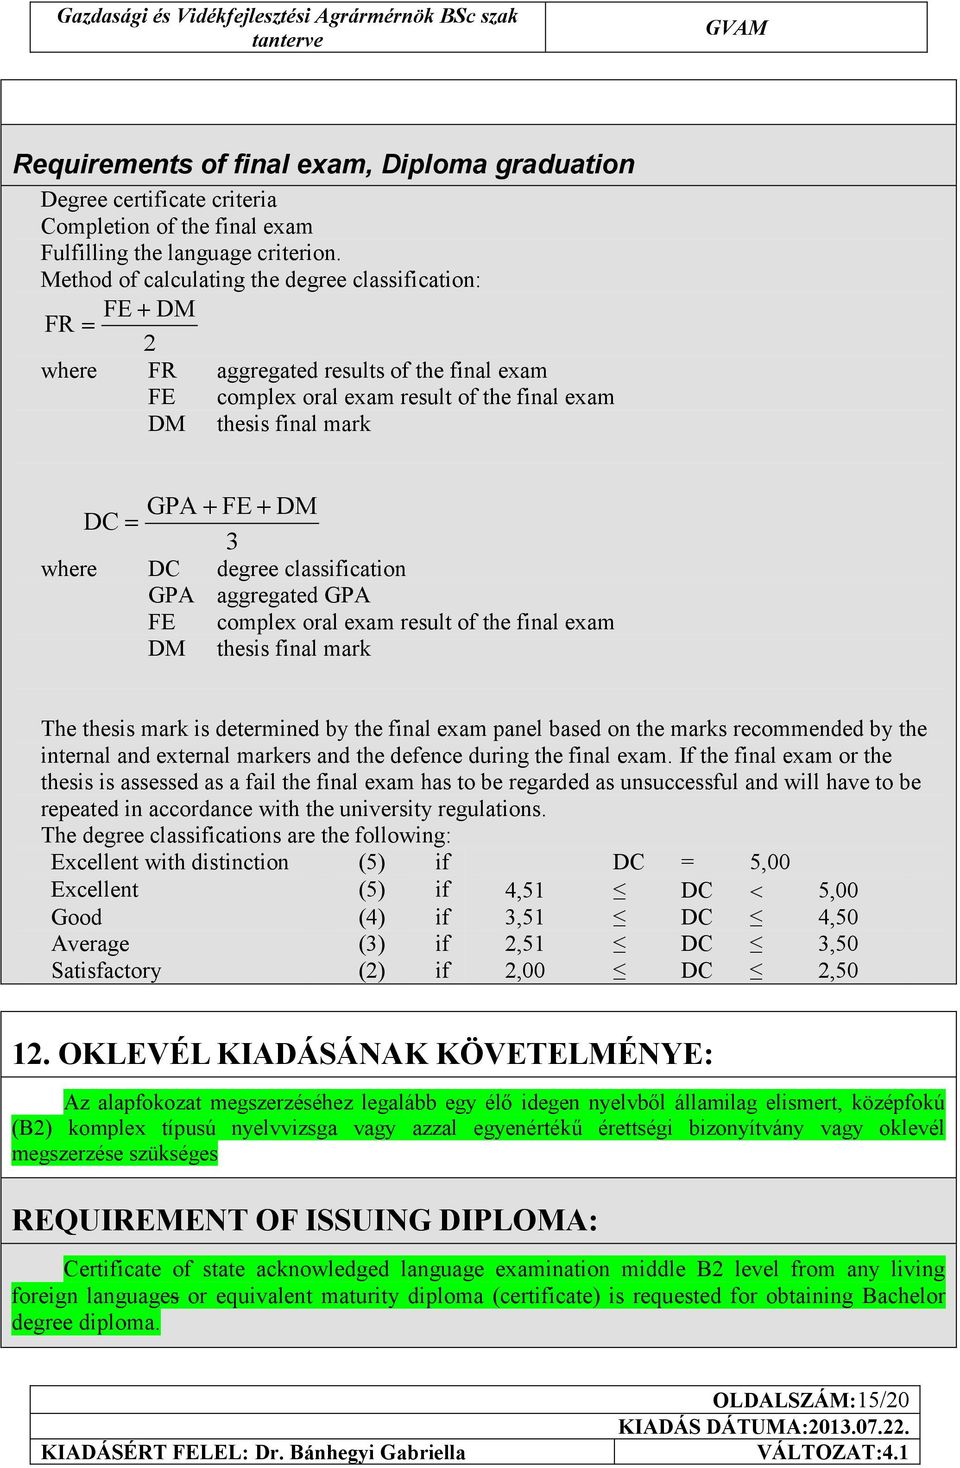 degree classification GPA aggregated GPA FE complex oral exam result of the final exam DM thesis final mark The thesis mark is determined by the final exam panel based on the marks recommended by the